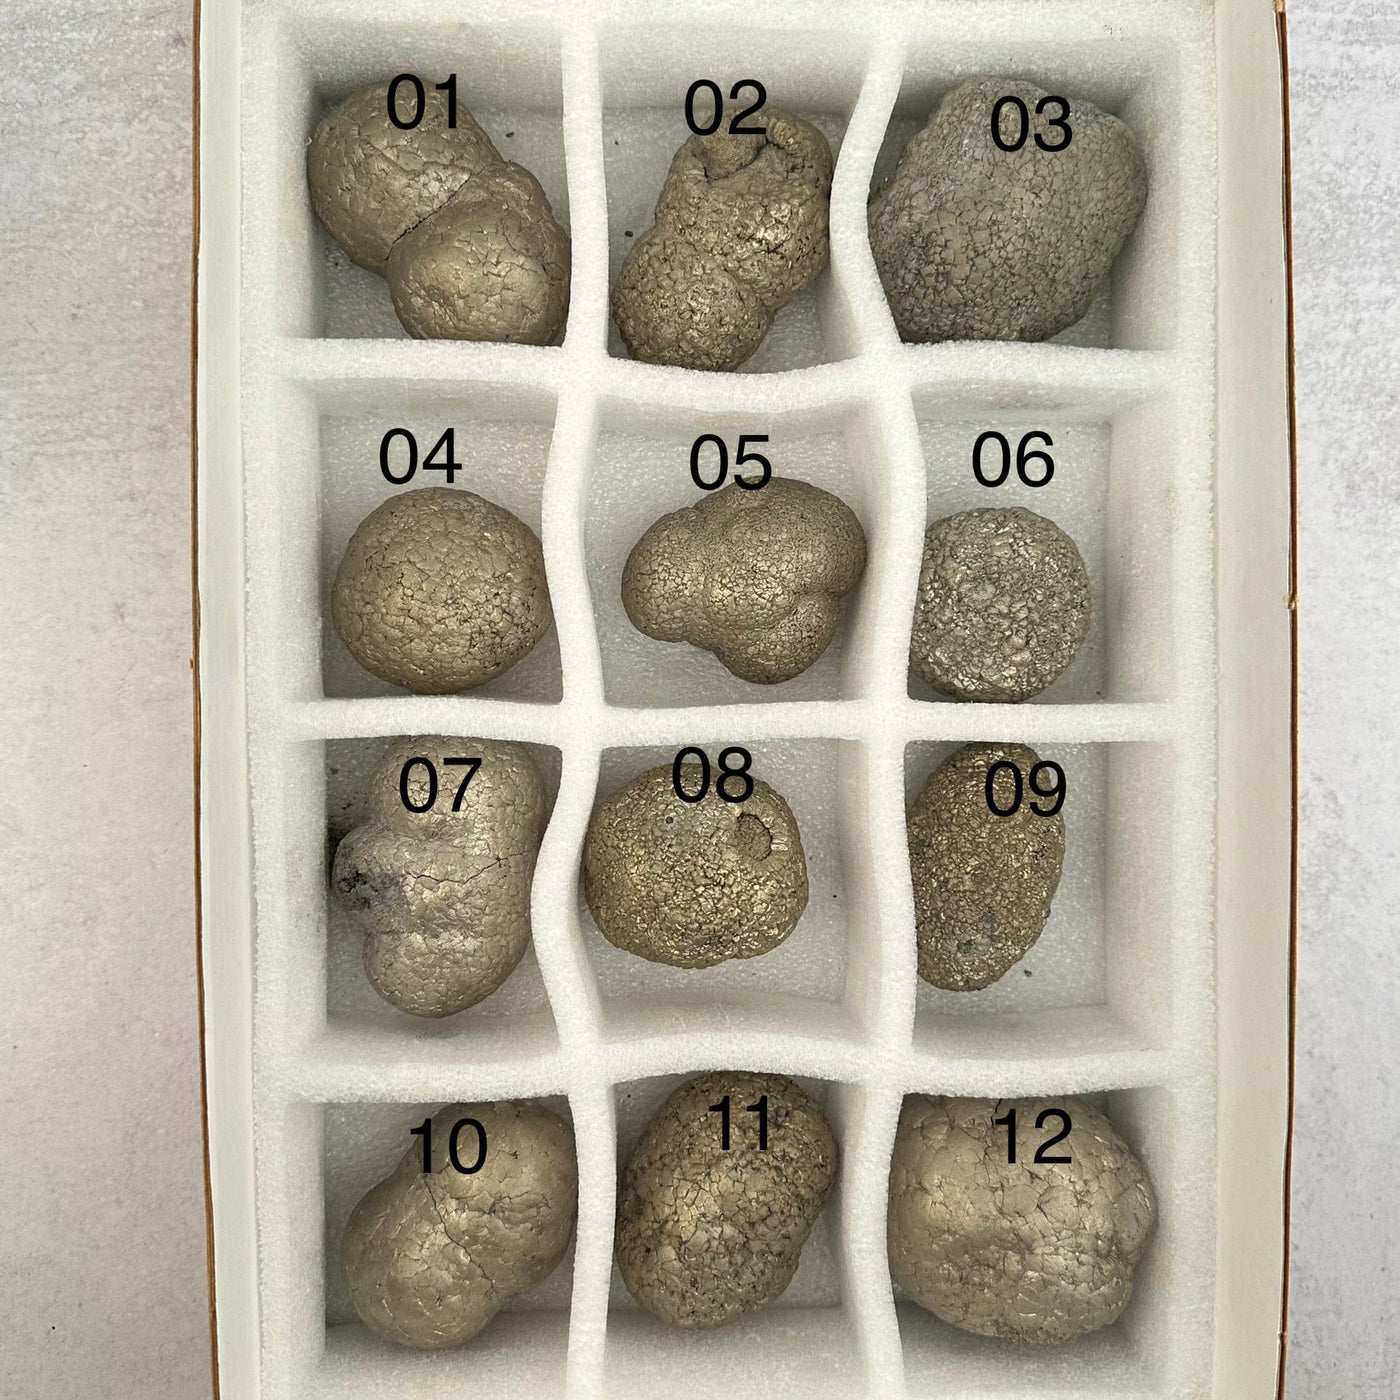 multiple pyrite nodules displayed to show the differences in the sizes